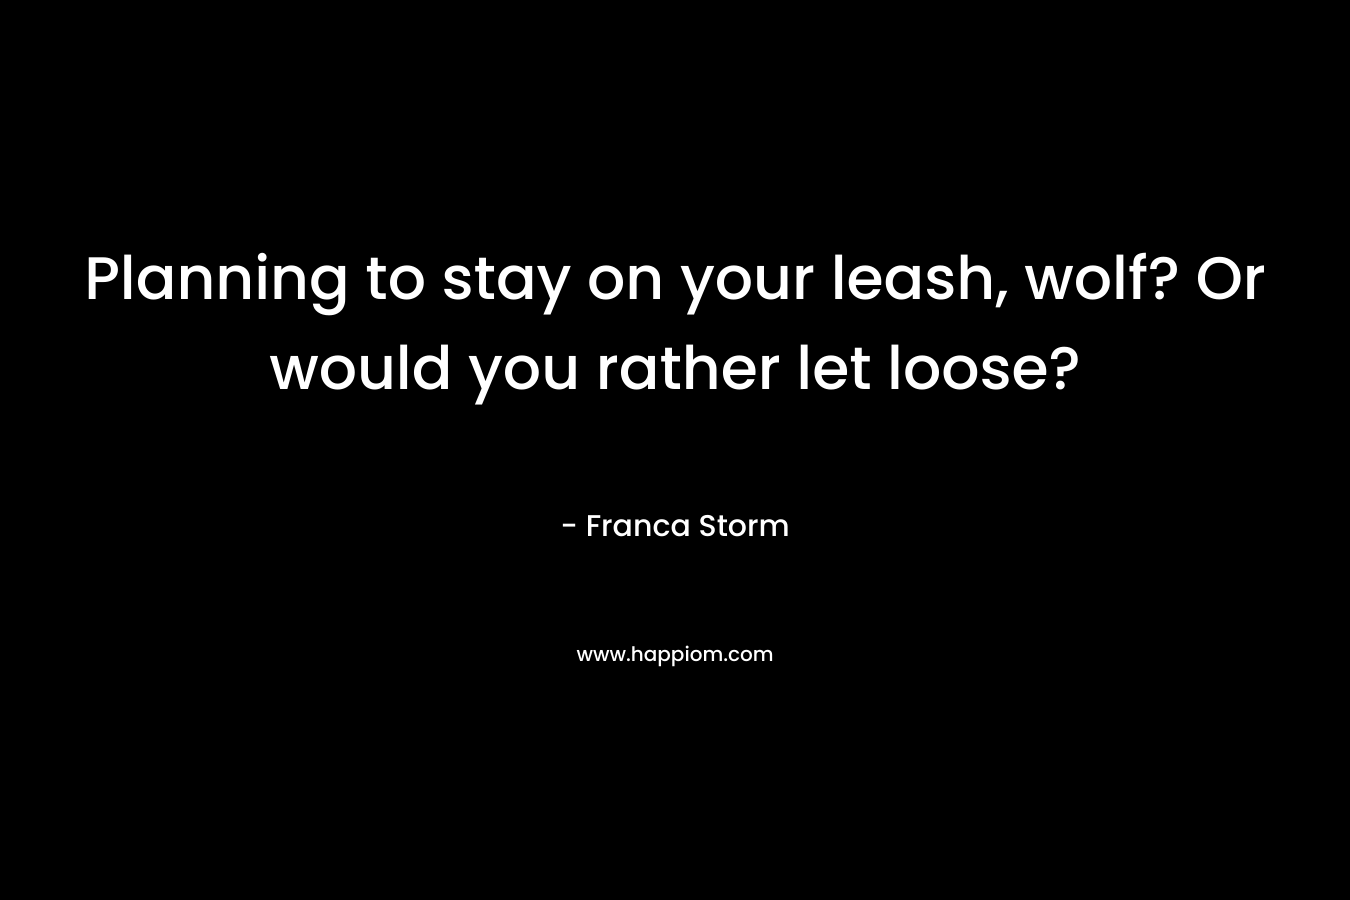 Planning to stay on your leash, wolf? Or would you rather let loose? – Franca Storm